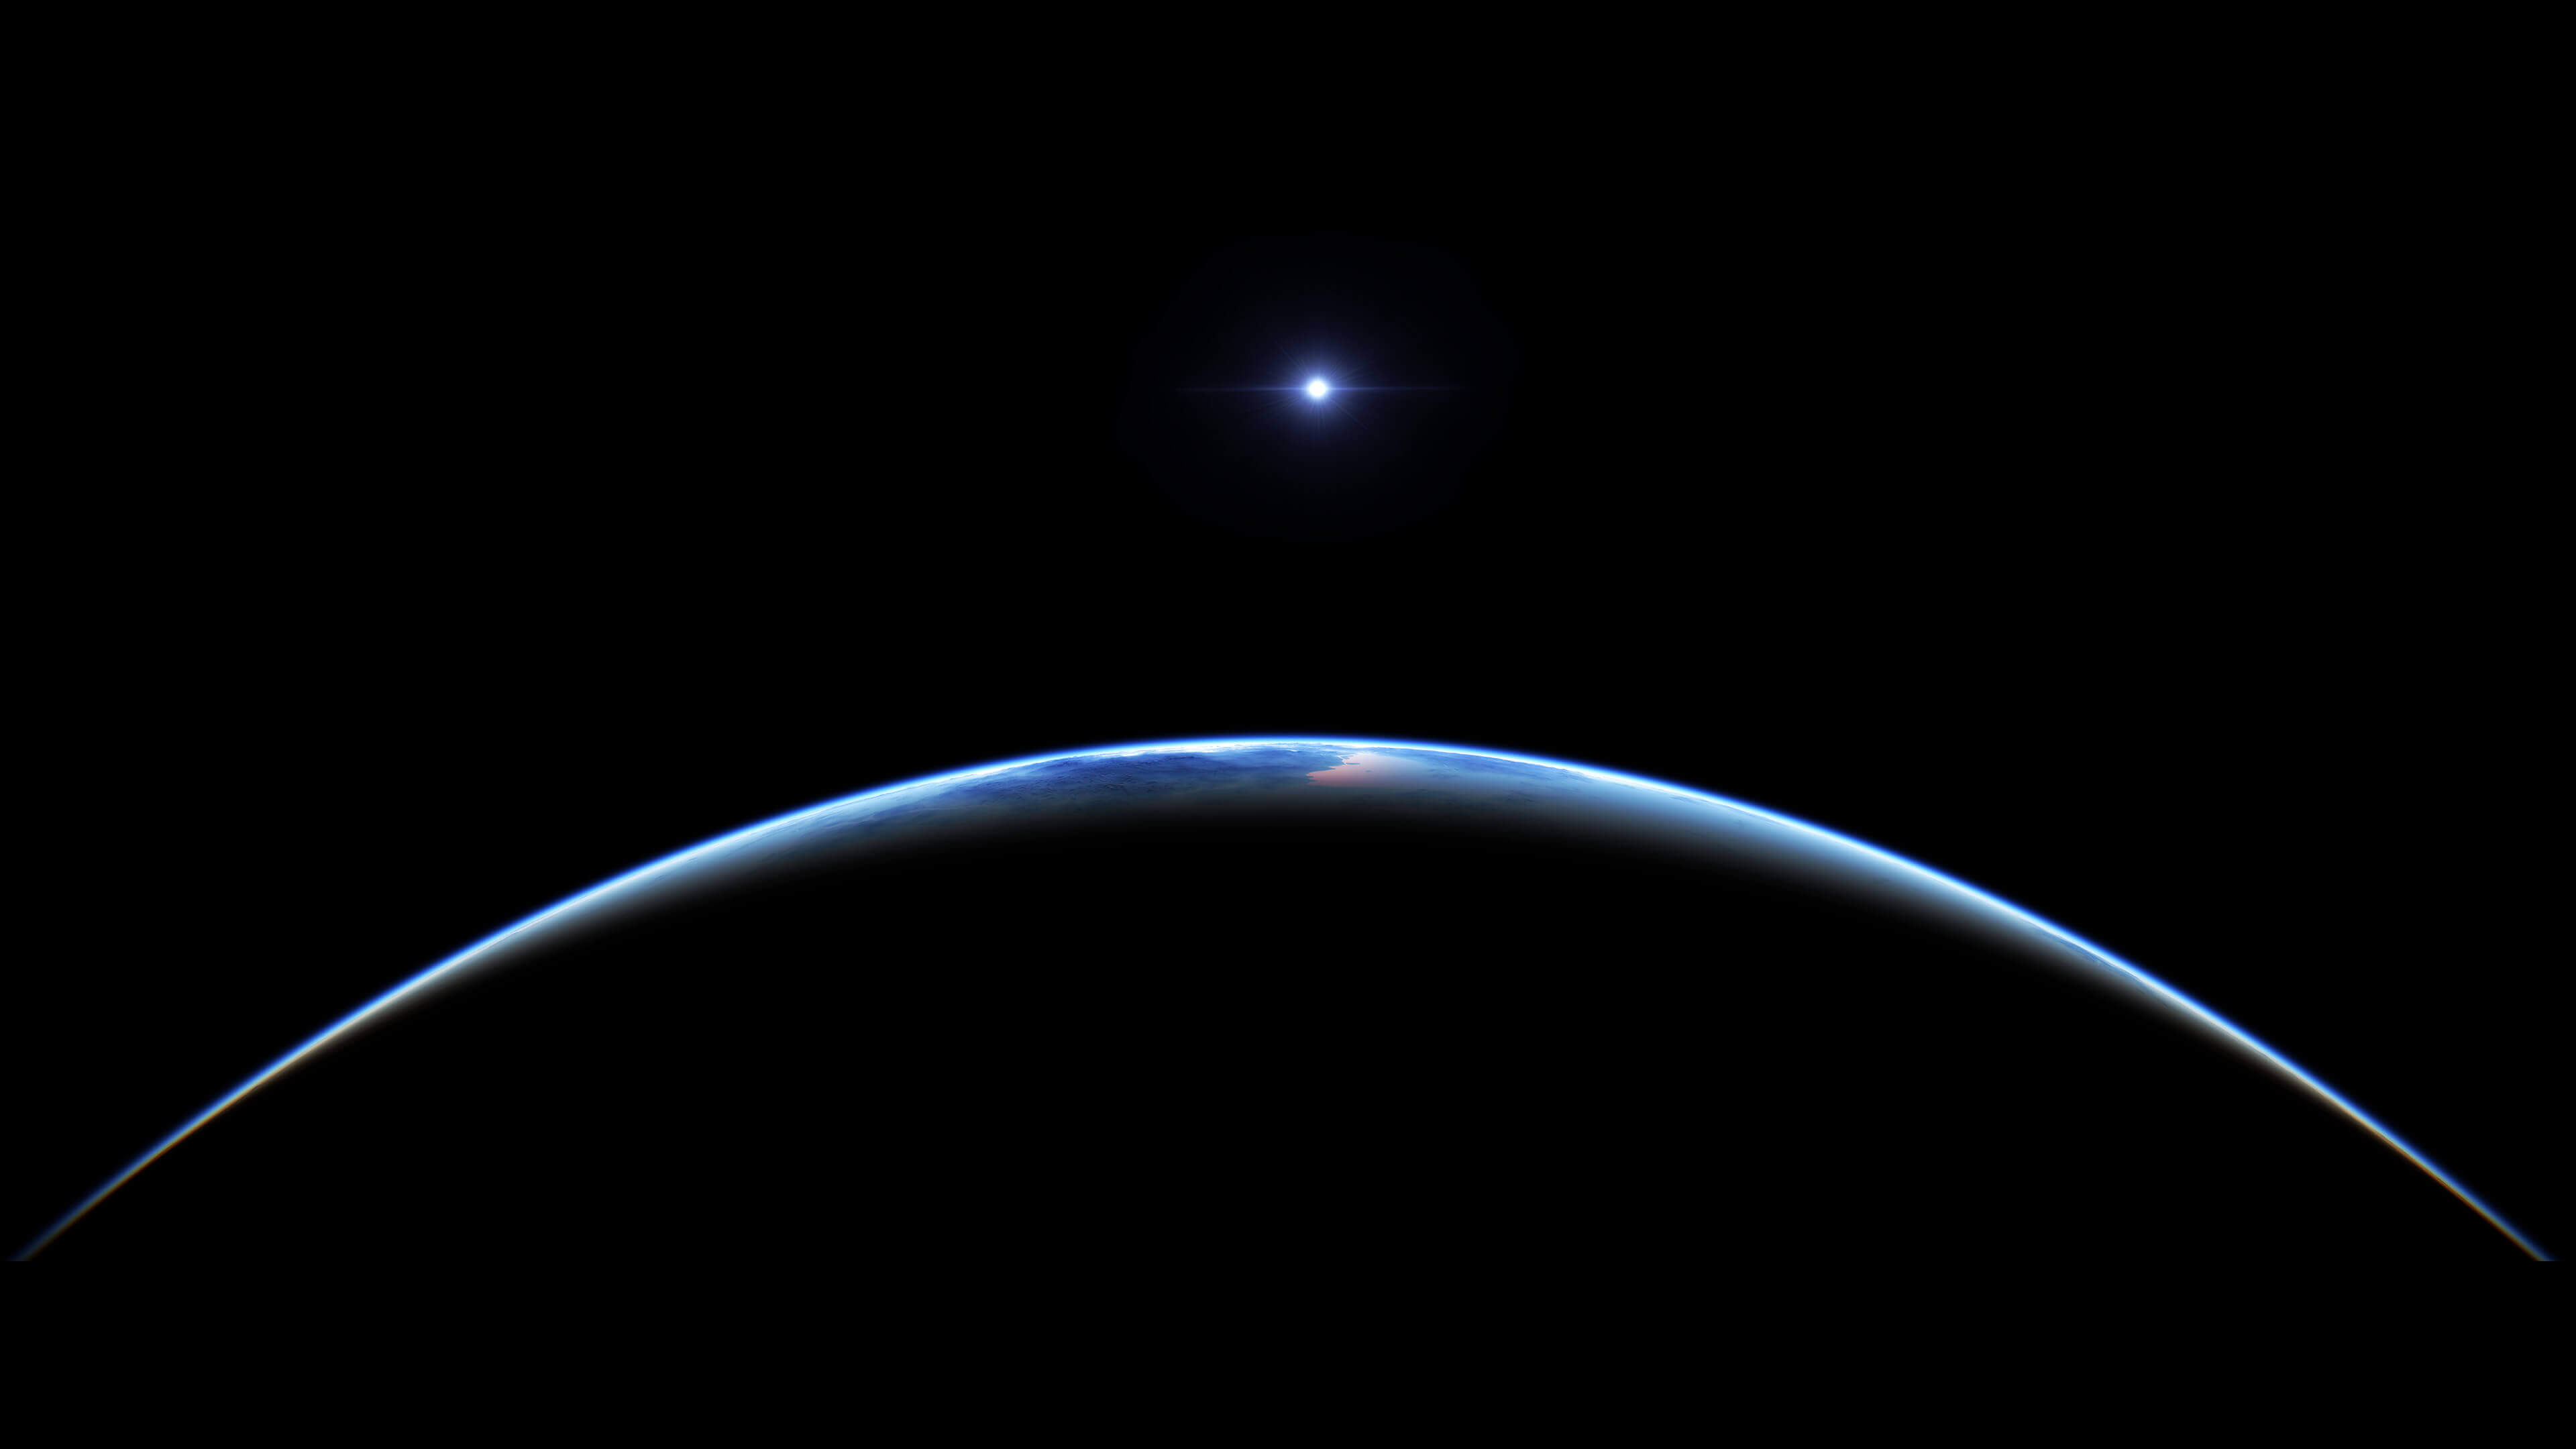 Earth at Night view from space 4K wallpaper 3840x2160